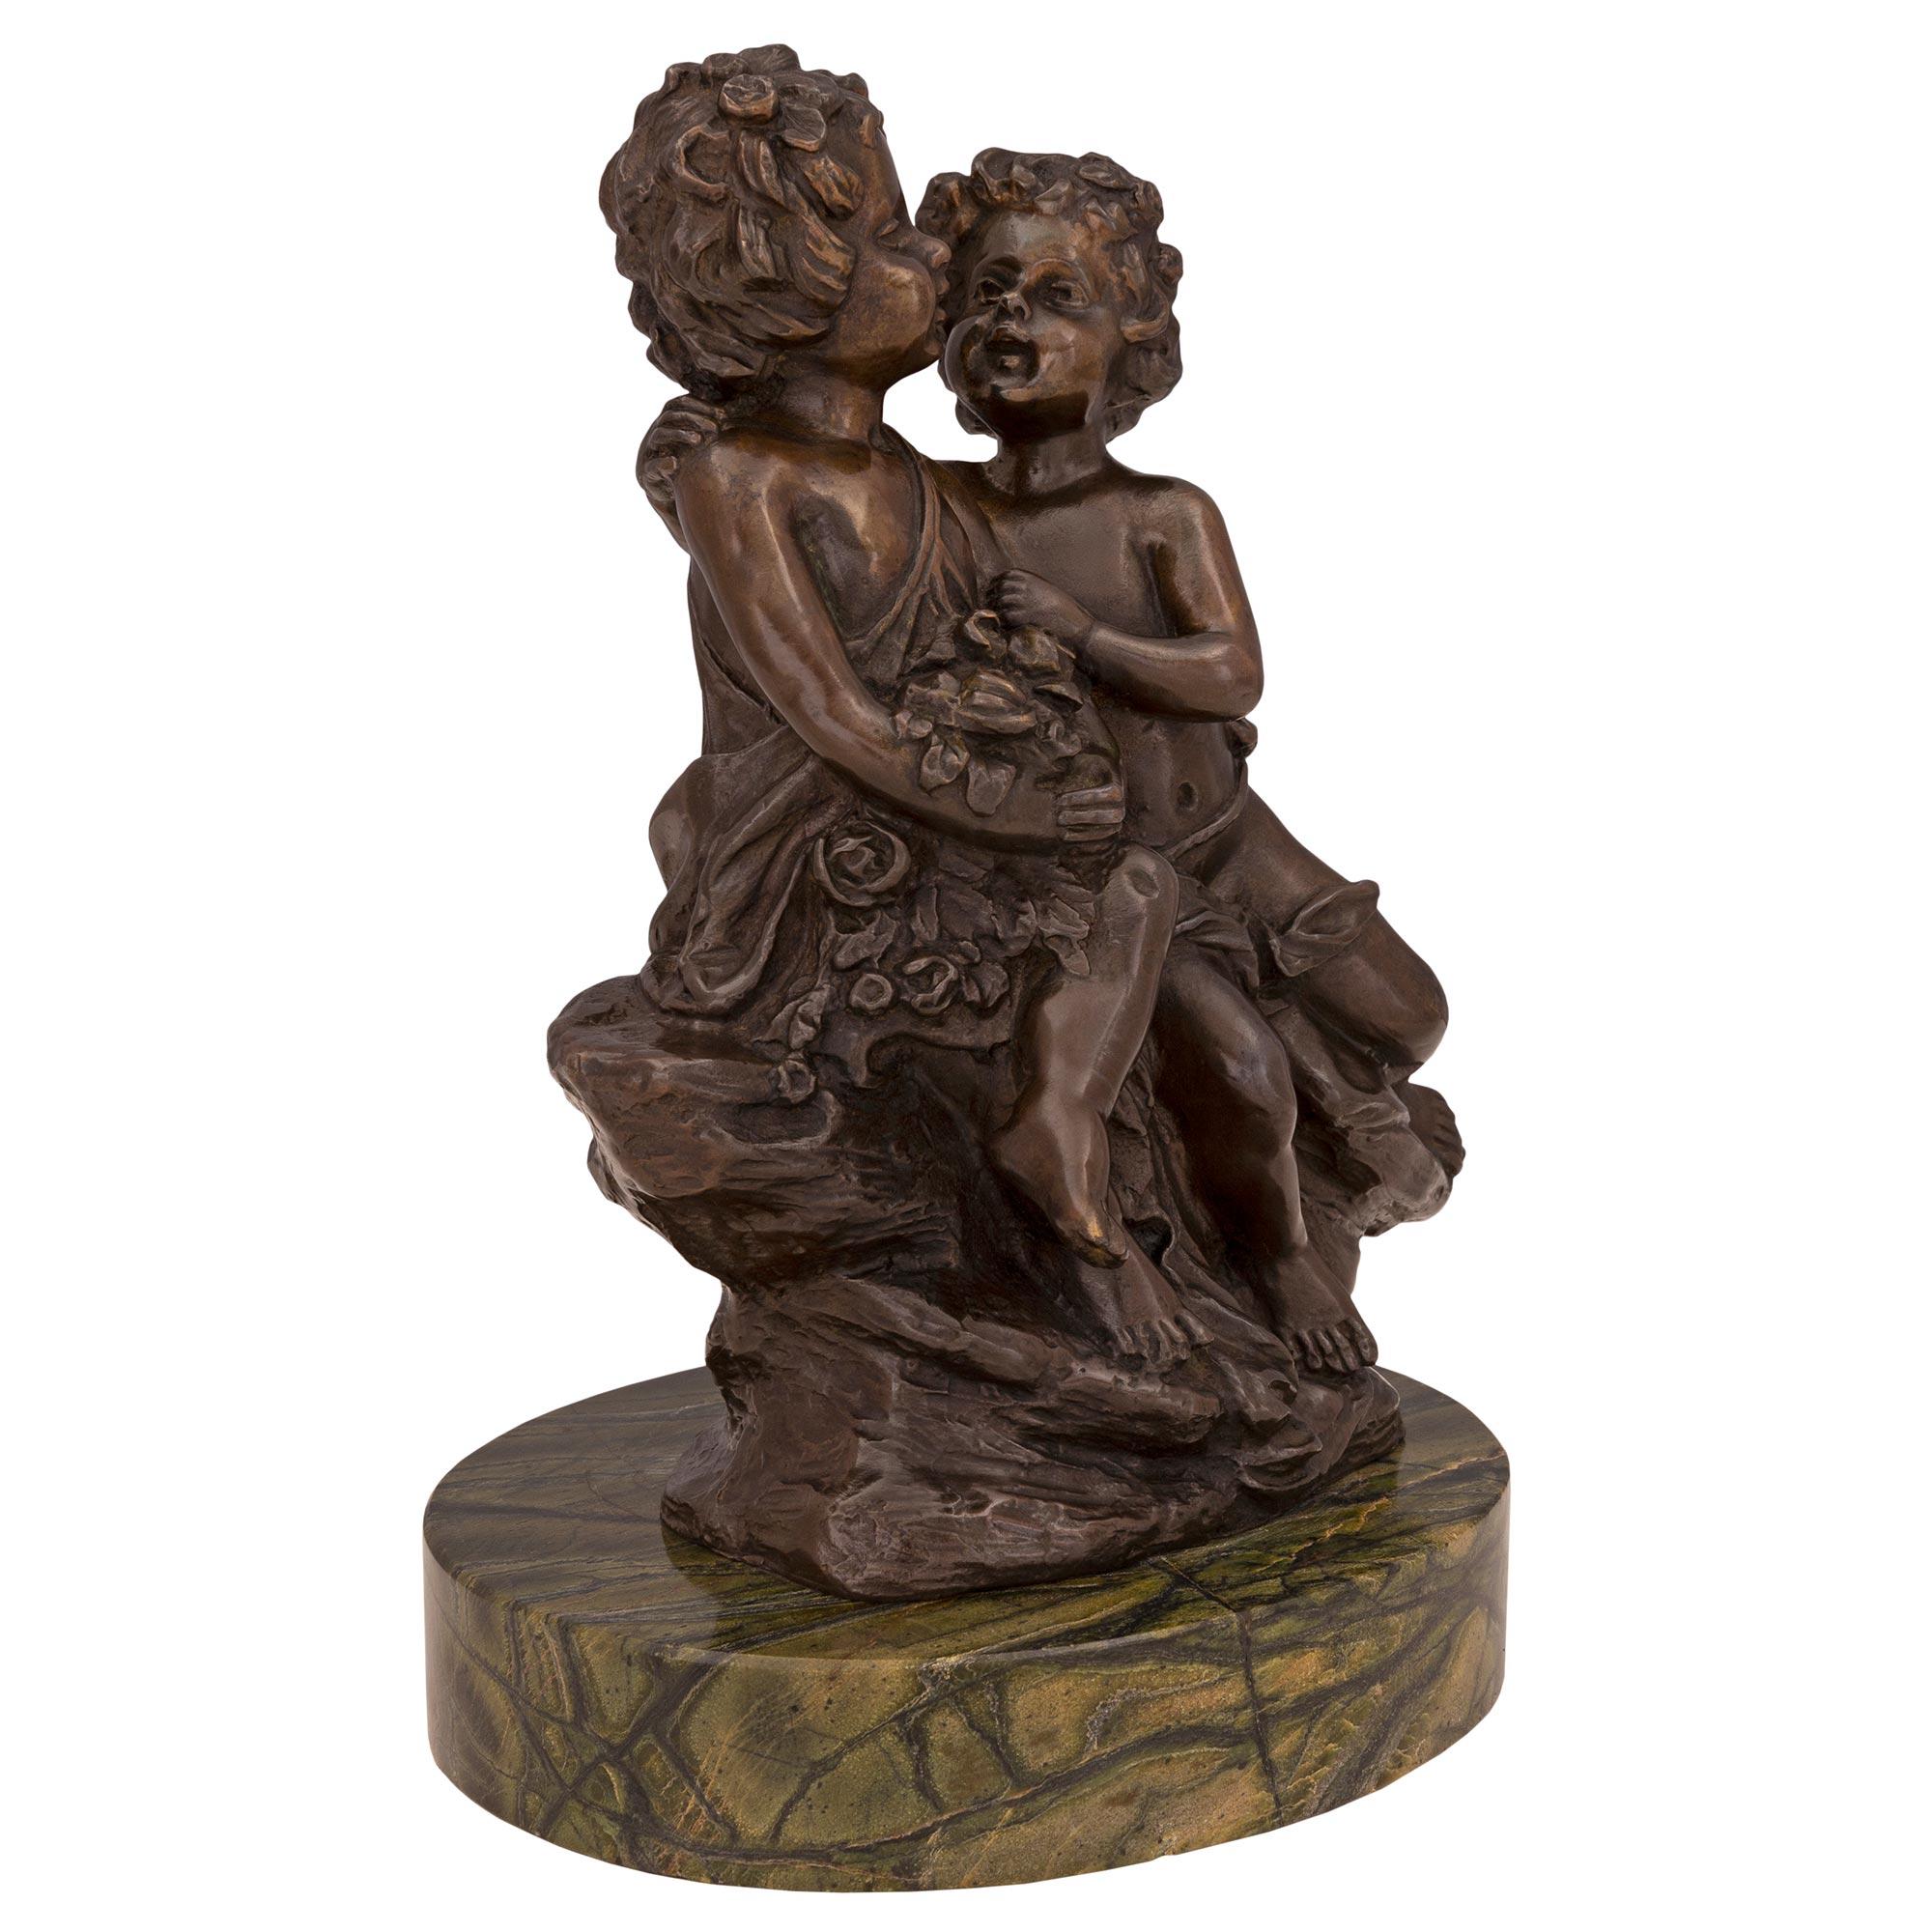 A charming French 19th century Louis XVI st. patinated bronze and marble statue, signed Auguste Moreau. The statue is raised by a fine circular marble base. The bronze above depicts a lovely scene of a young boy courting a charming young girl. They